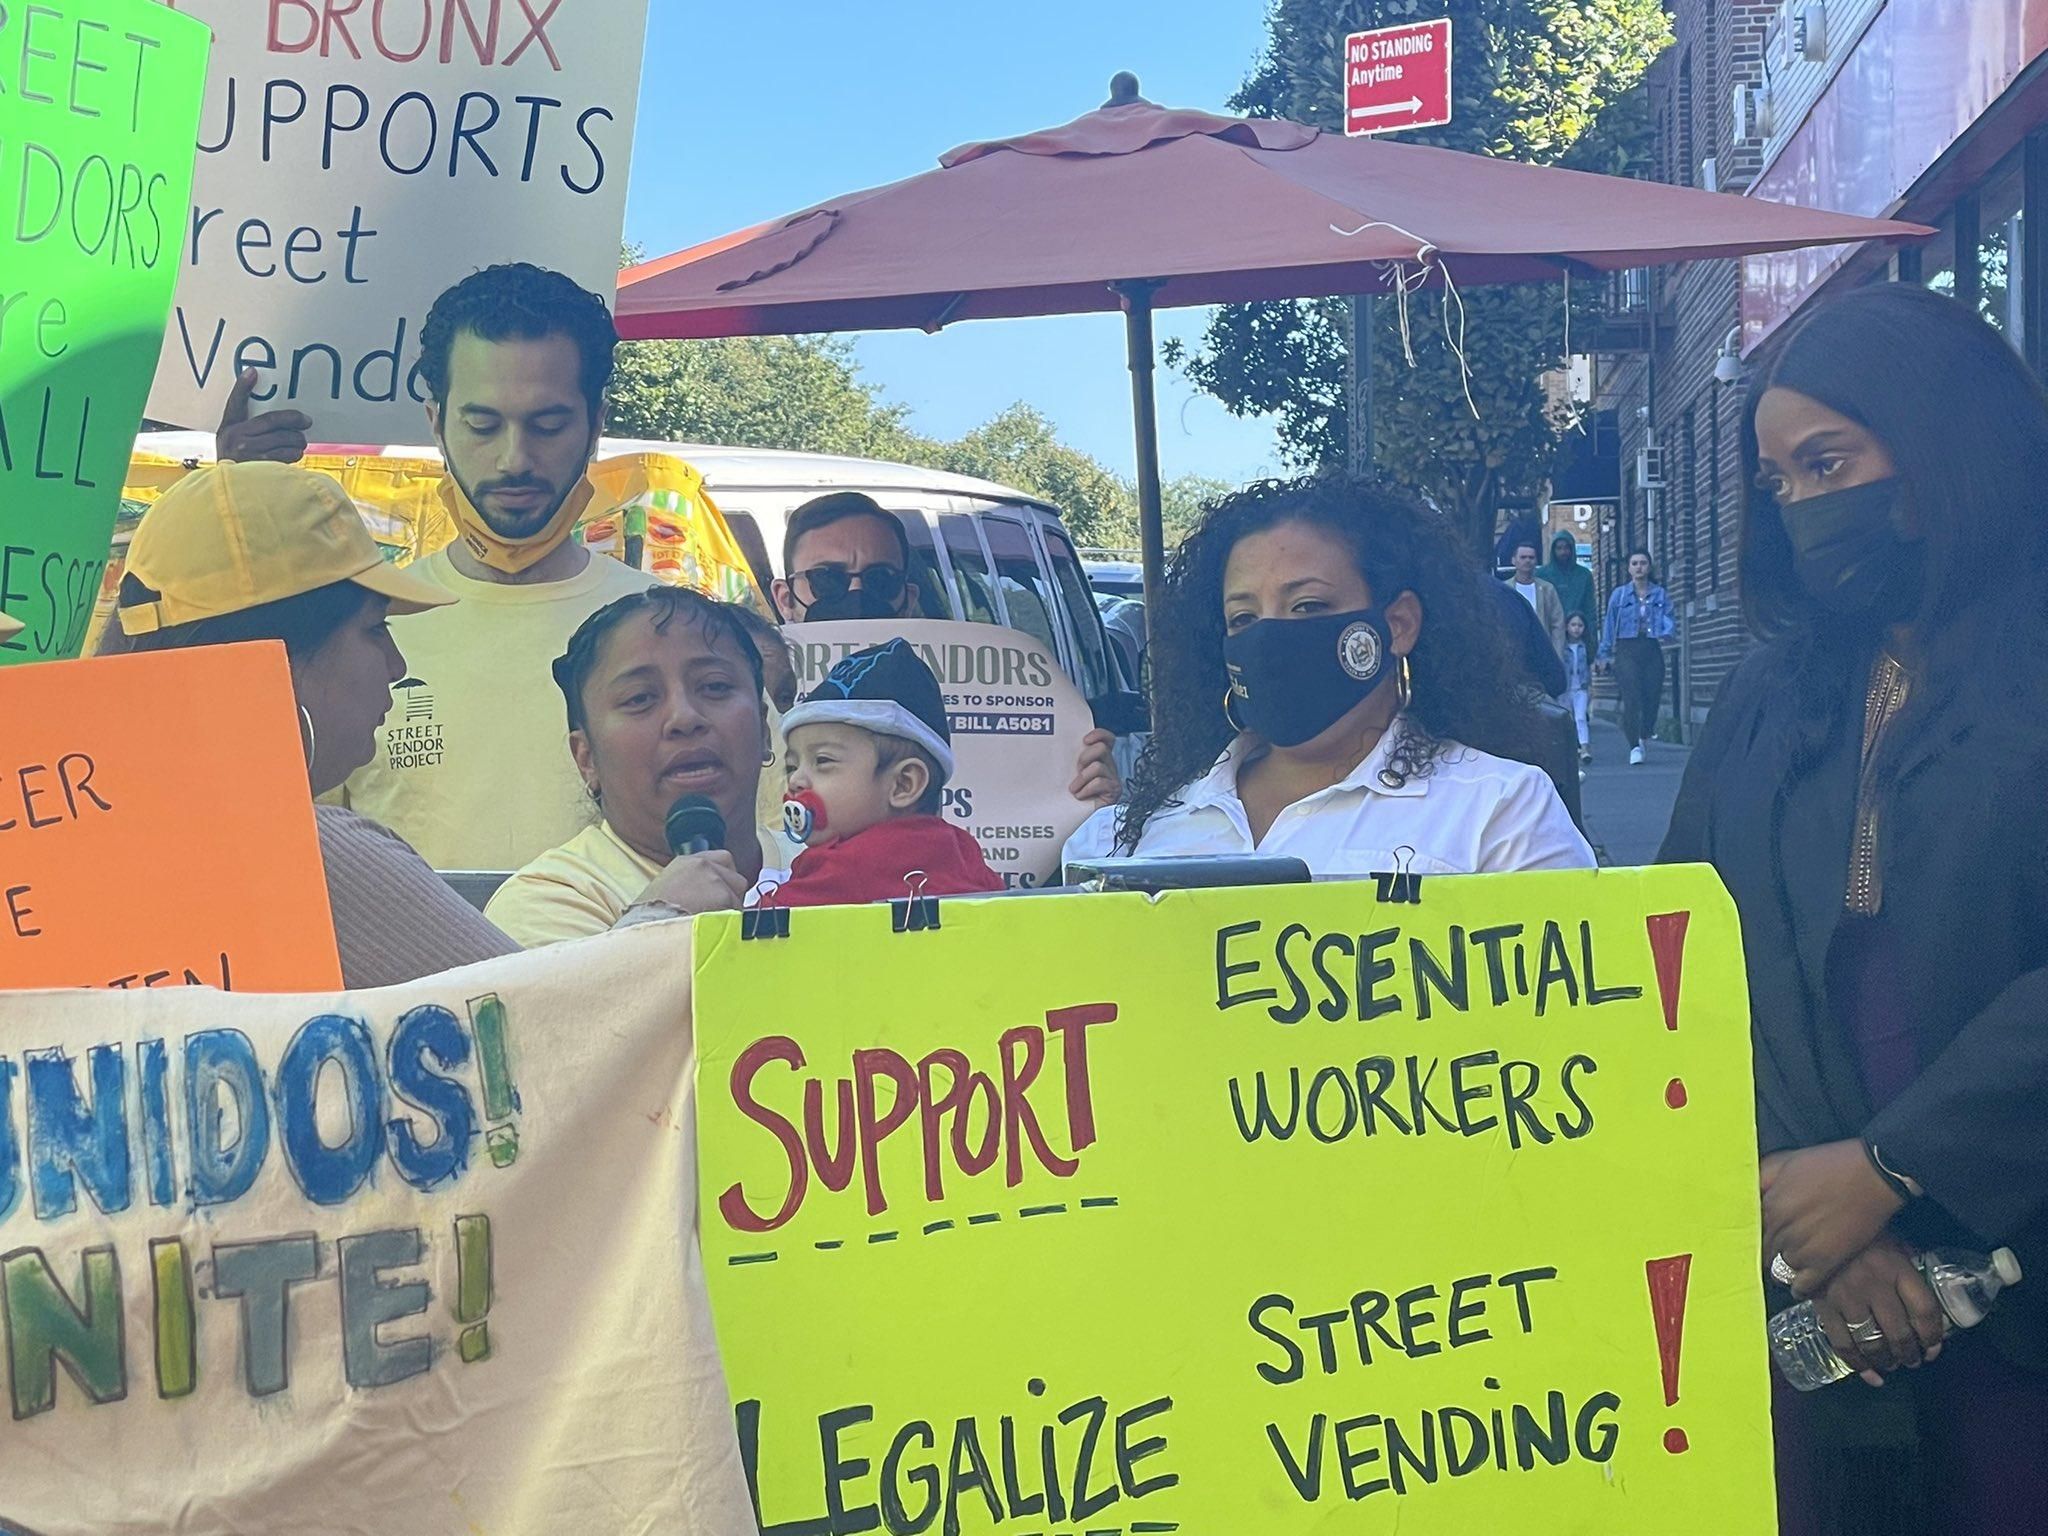 Diana Hernandez Cruz, a Bronx-based food vendor whose produce stand was destroyed last week over a missing permit, speaks at a rally to legalize street vending on September 26, 2021 in New York City. (Photo: Nathalia Fernández via Twitter)